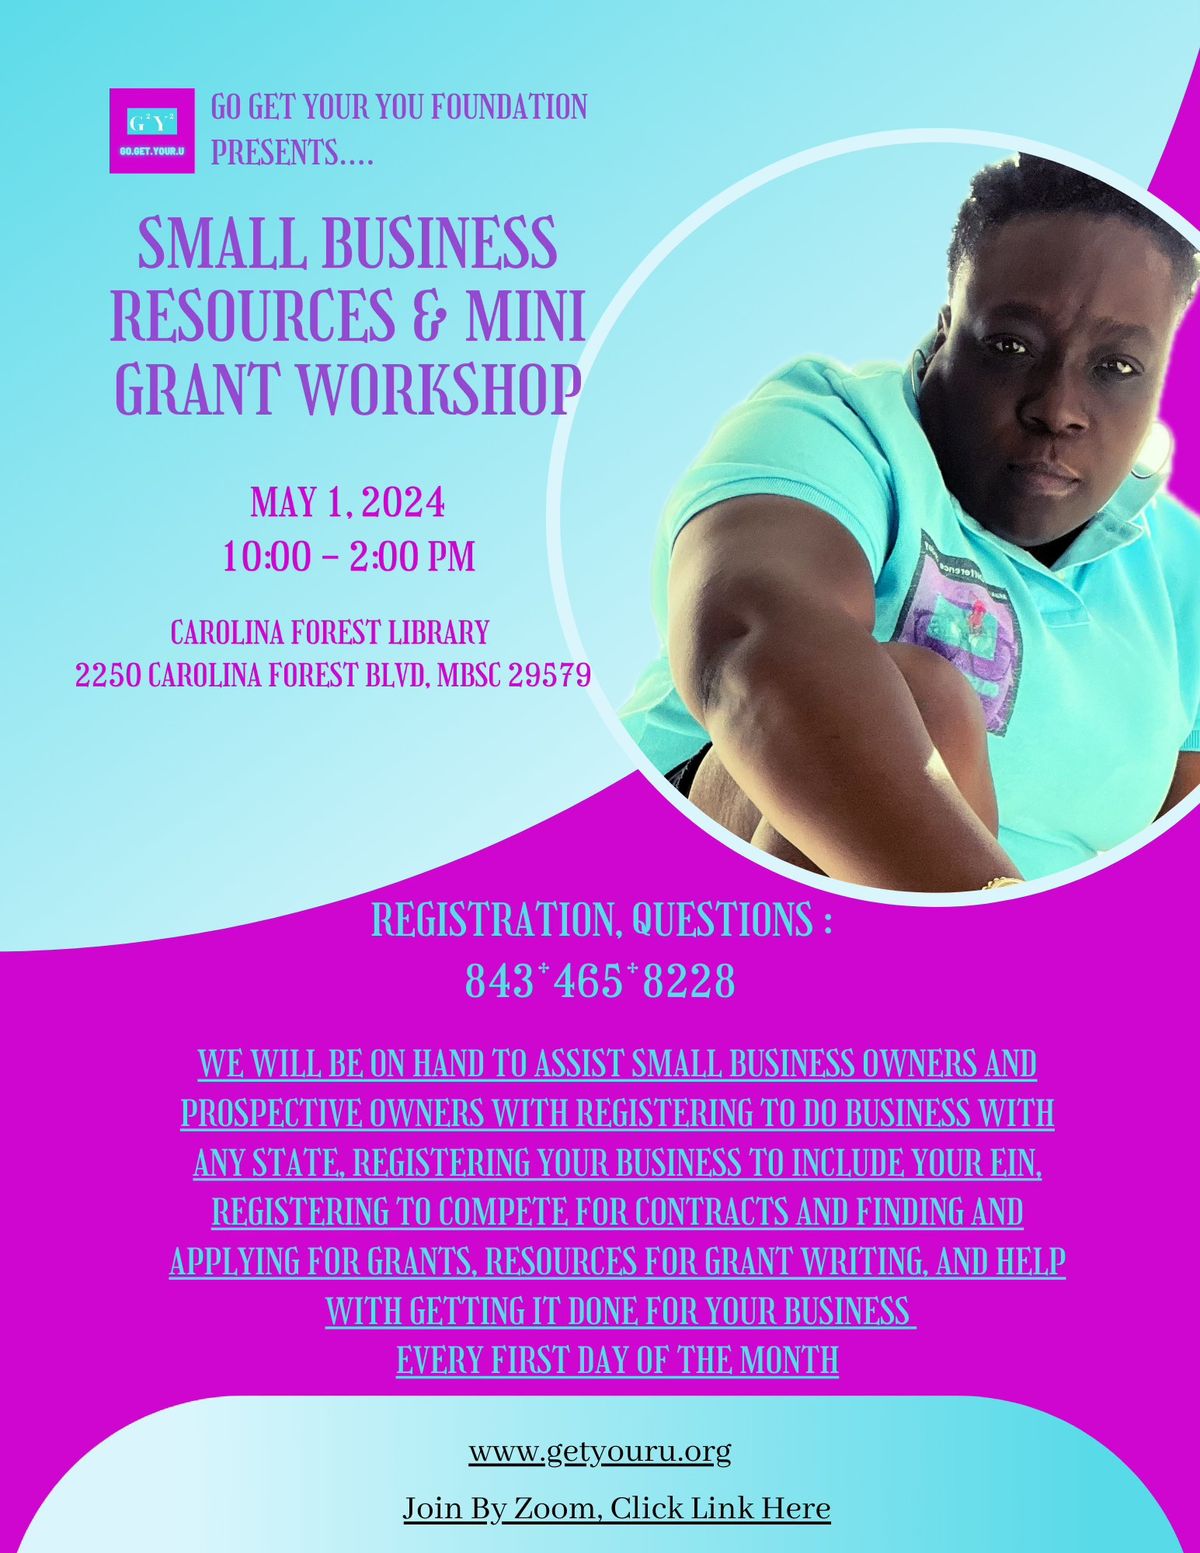 SMALL BUSINESS RESOURCE AND MINI GRANT WORKSHOP